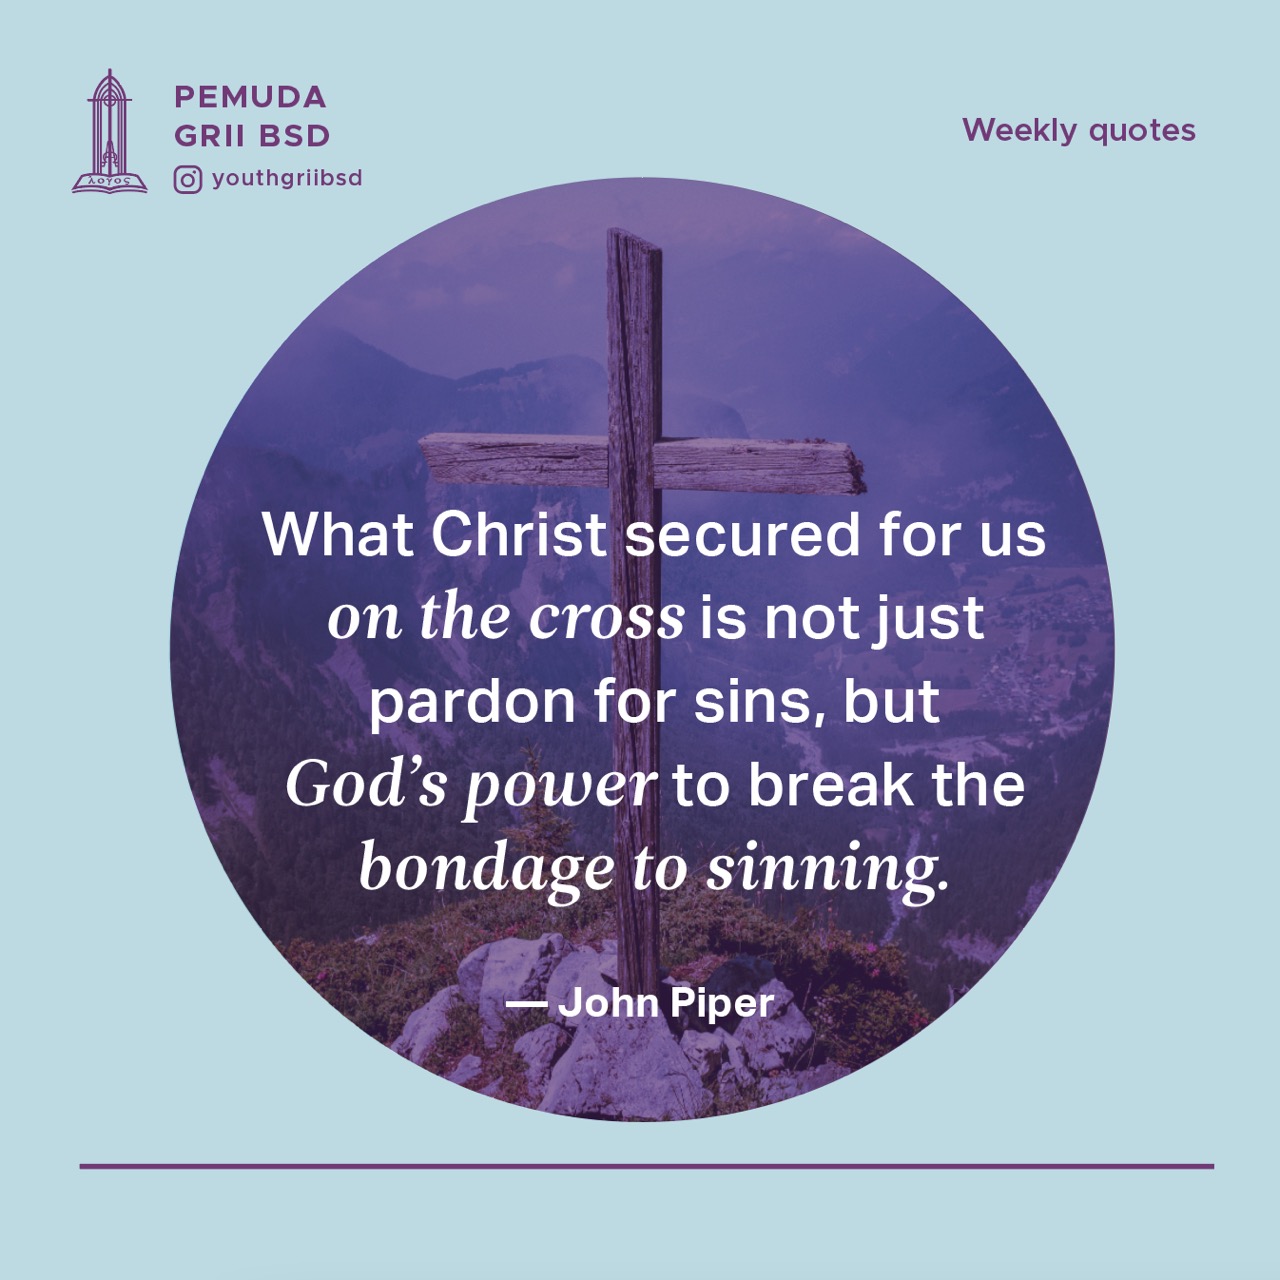 What Christ secured for us on the cross is not just pardon for sins, but God's power to break the bondage to sinning.